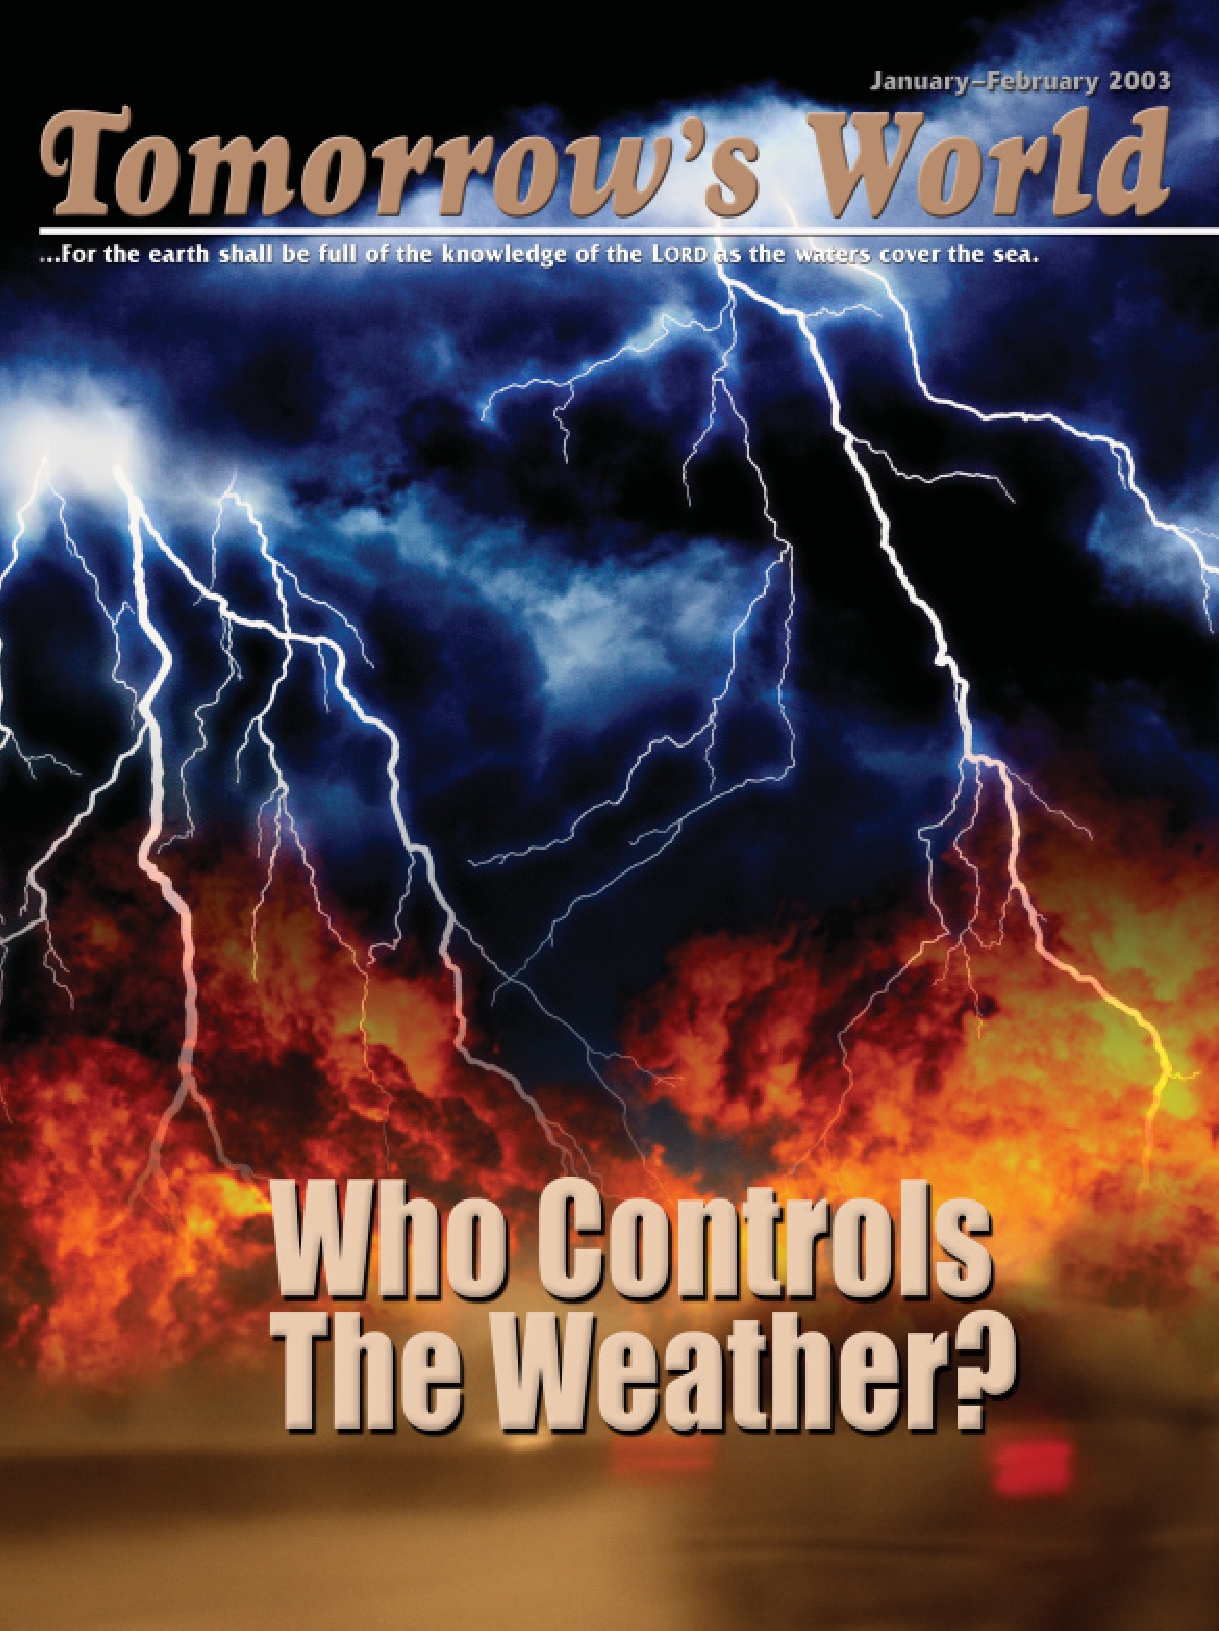 Who Controls the Weather? Tomorrow's World